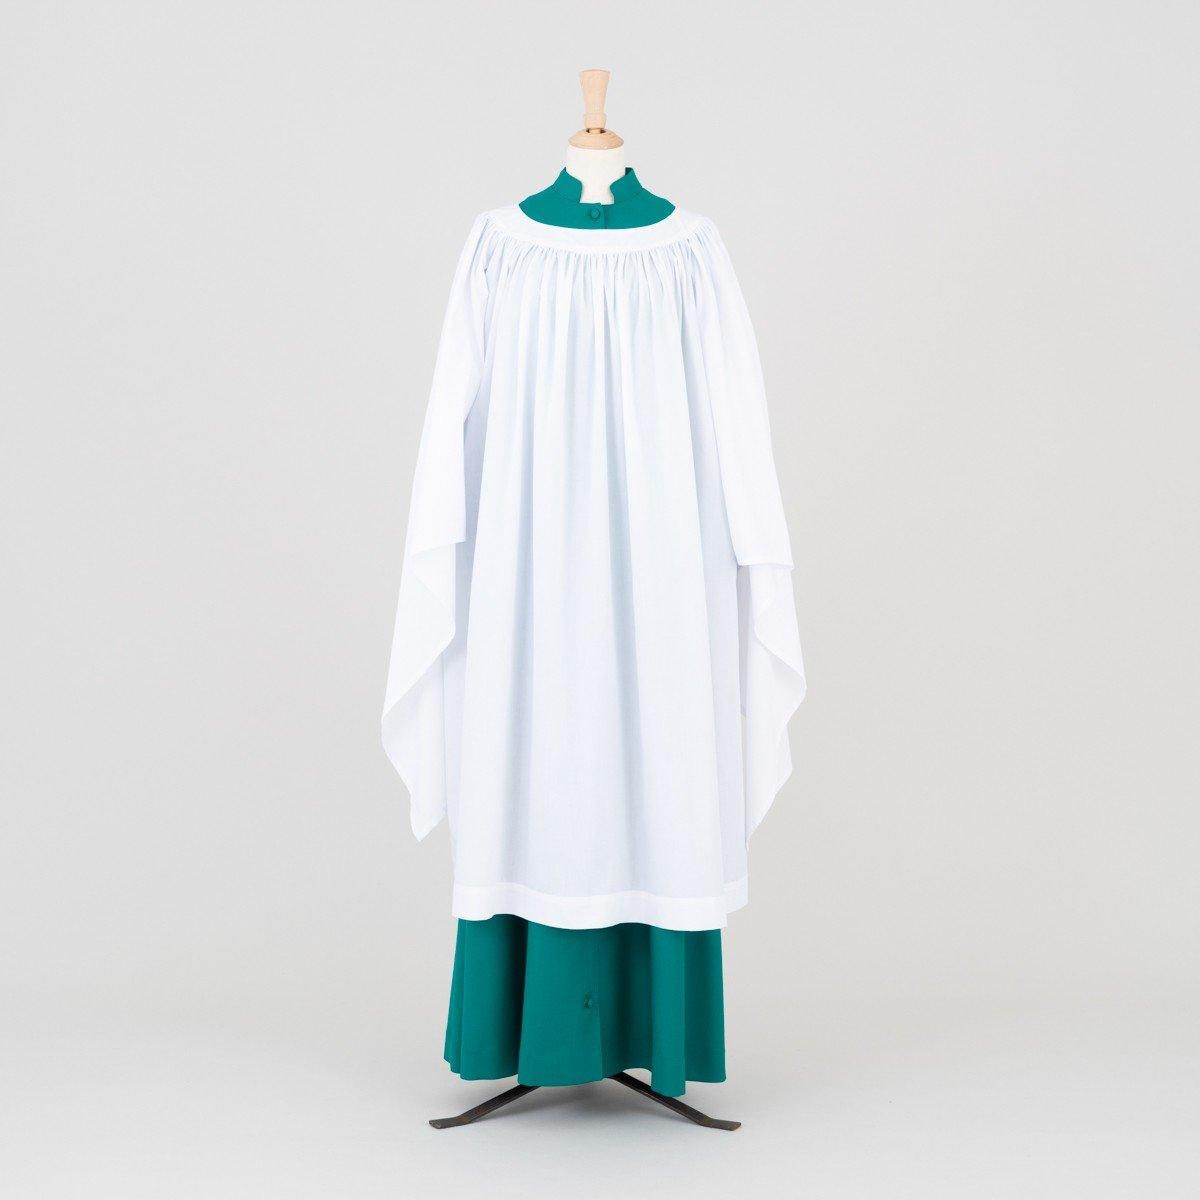 Adult's Cathedral Surplice - Watts & Co. (international)